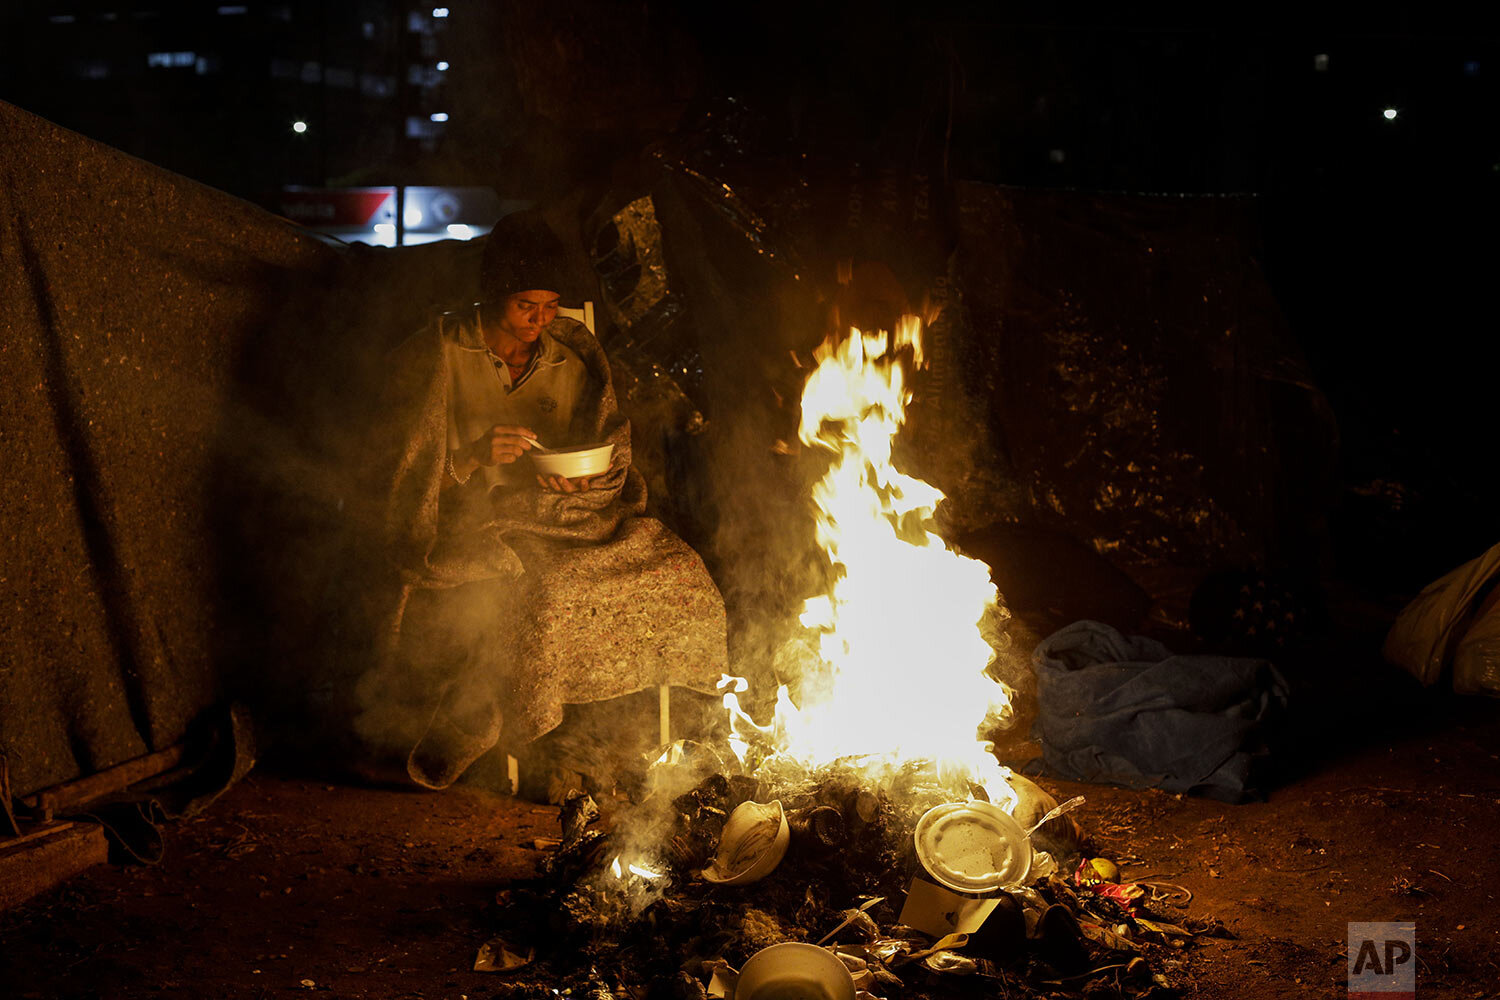  A homeless person sits by a fire amid historically cold weather in Sao Paulo, Brazil, late Thursday, July 29, 2021. The Brazilian government's meteorological institute says low temperatures should endure until the start of August. (AP Photo/Marcelo 